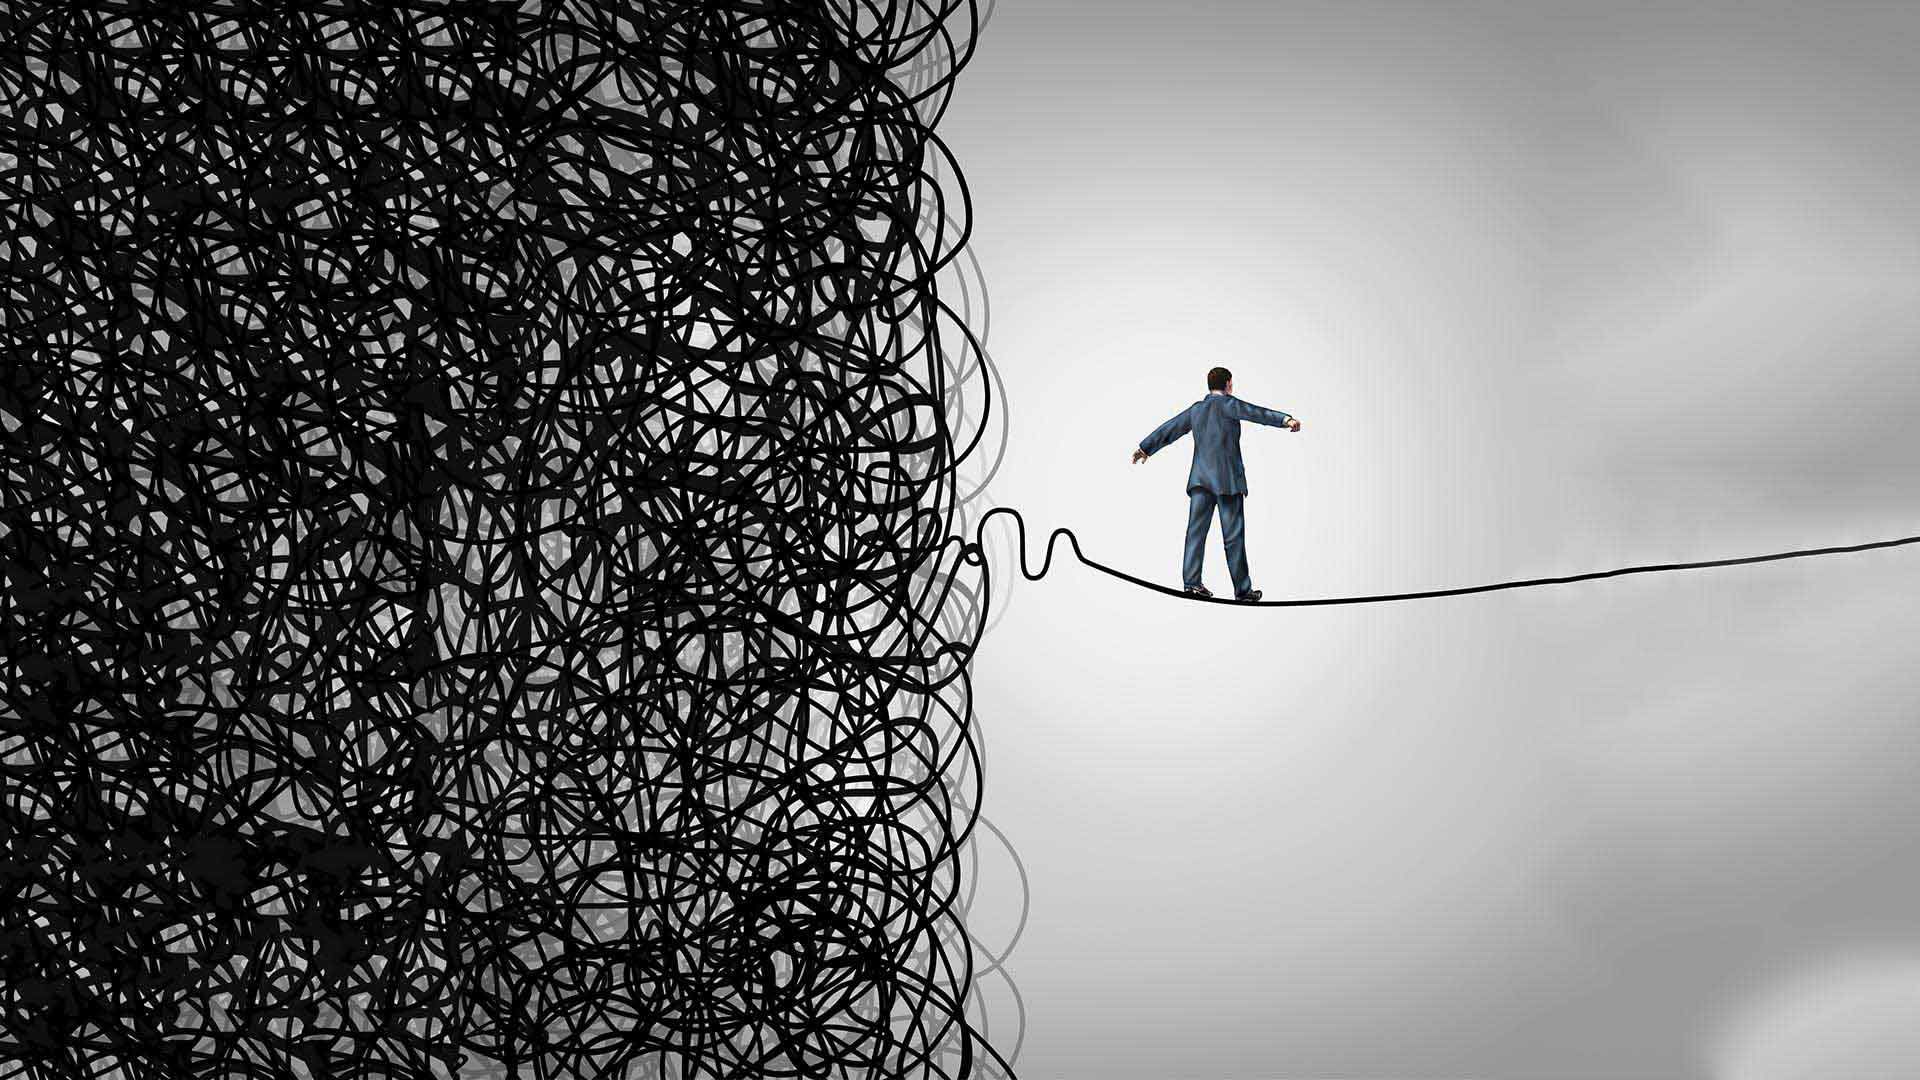 Image of a man balancing on a wire, having left the tangled mass of his past behind him.